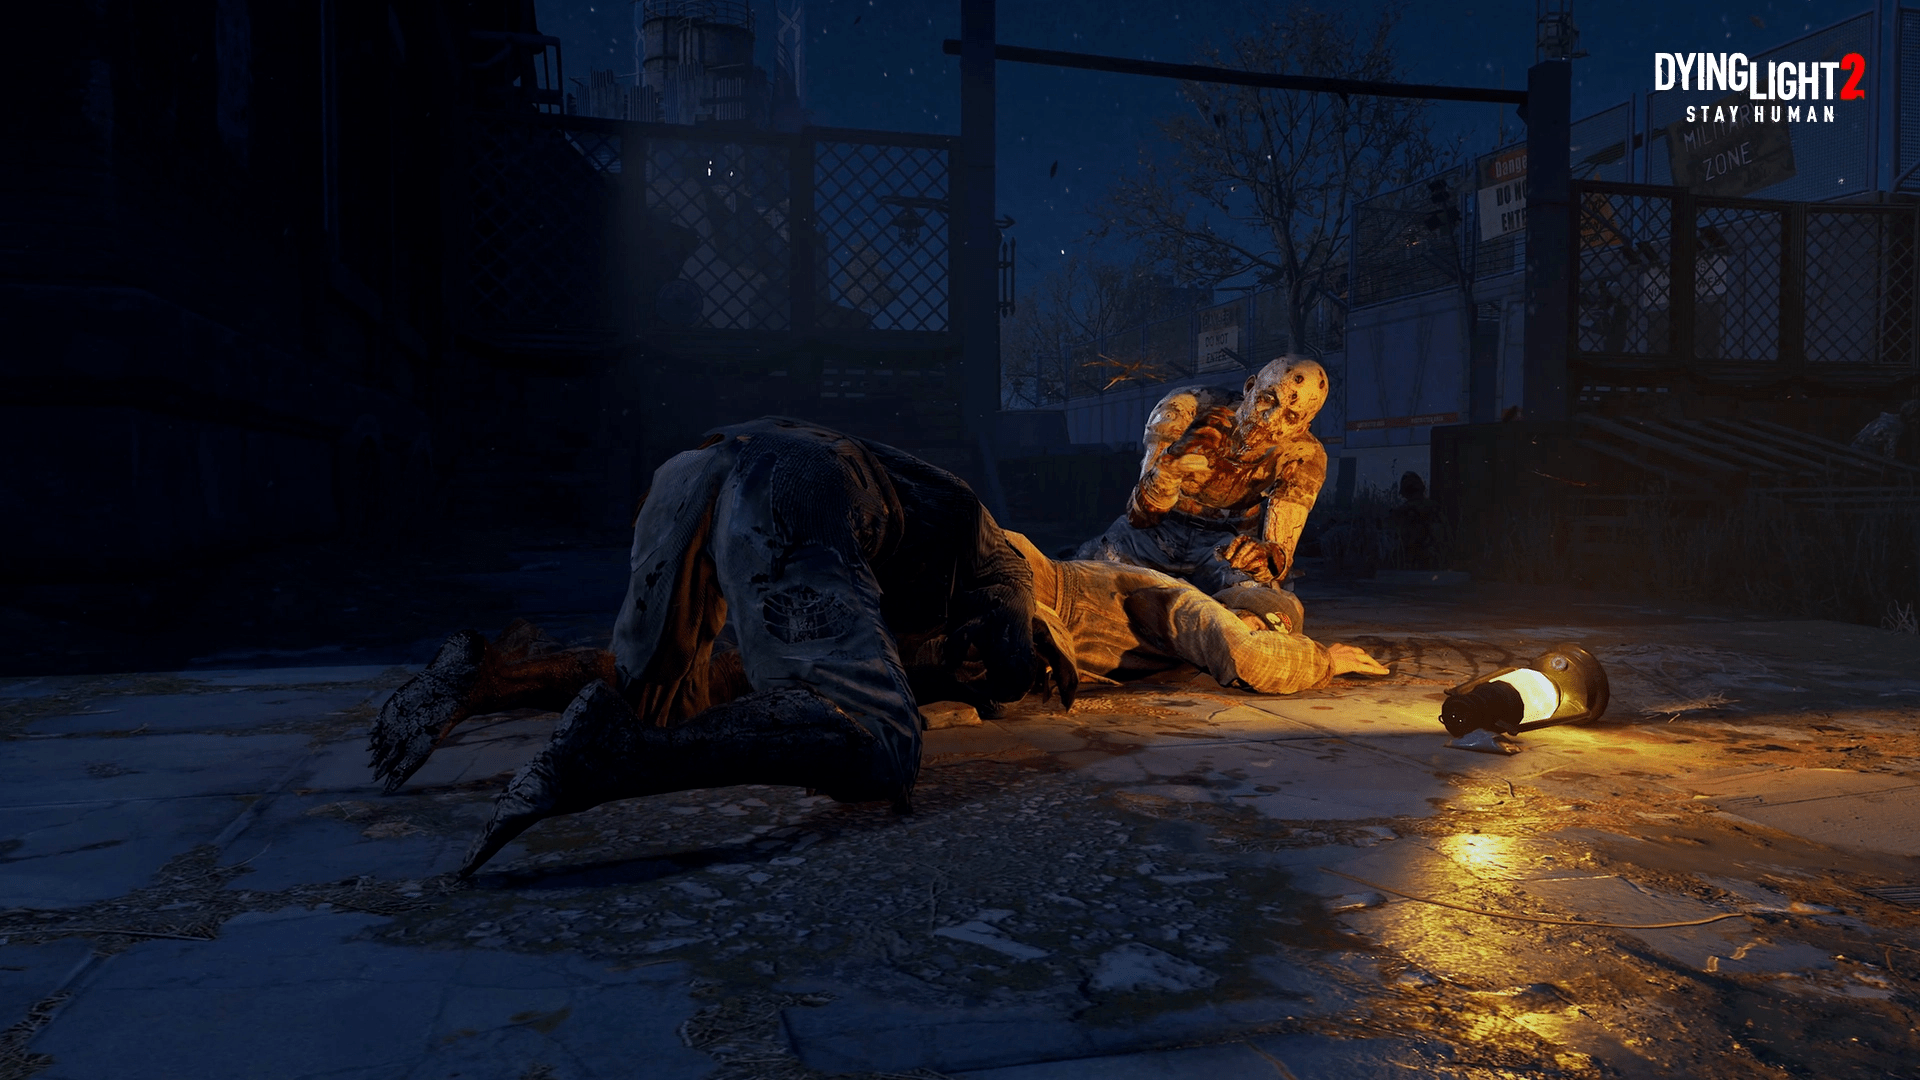 Dying Light - Survival Mod at Dying Light Nexus - Mods and community